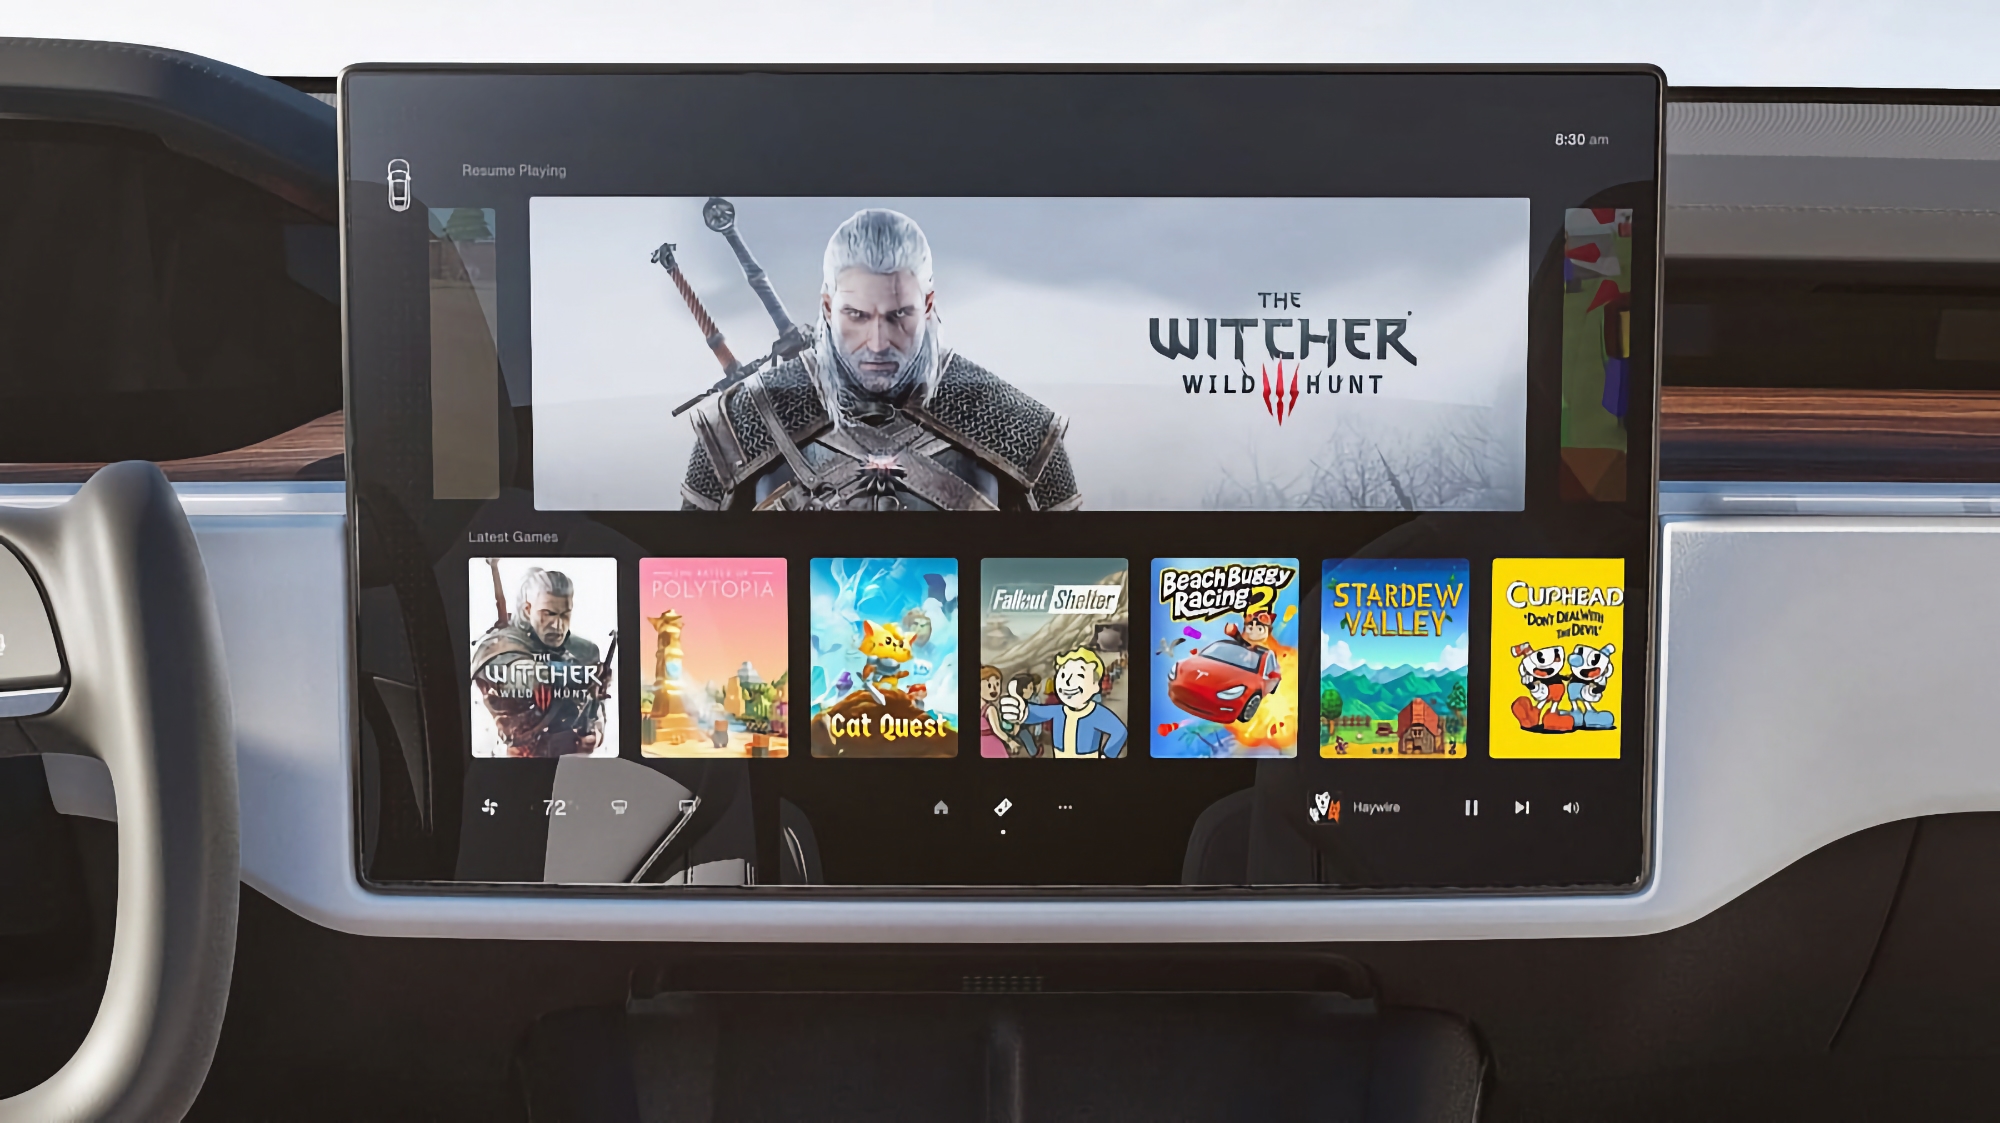 Not just Apple Music: Tesla Model S and Model X electric cars got Steam with support for Cyberpunk 2077, The Witcher 3: Wild Hunt and other games